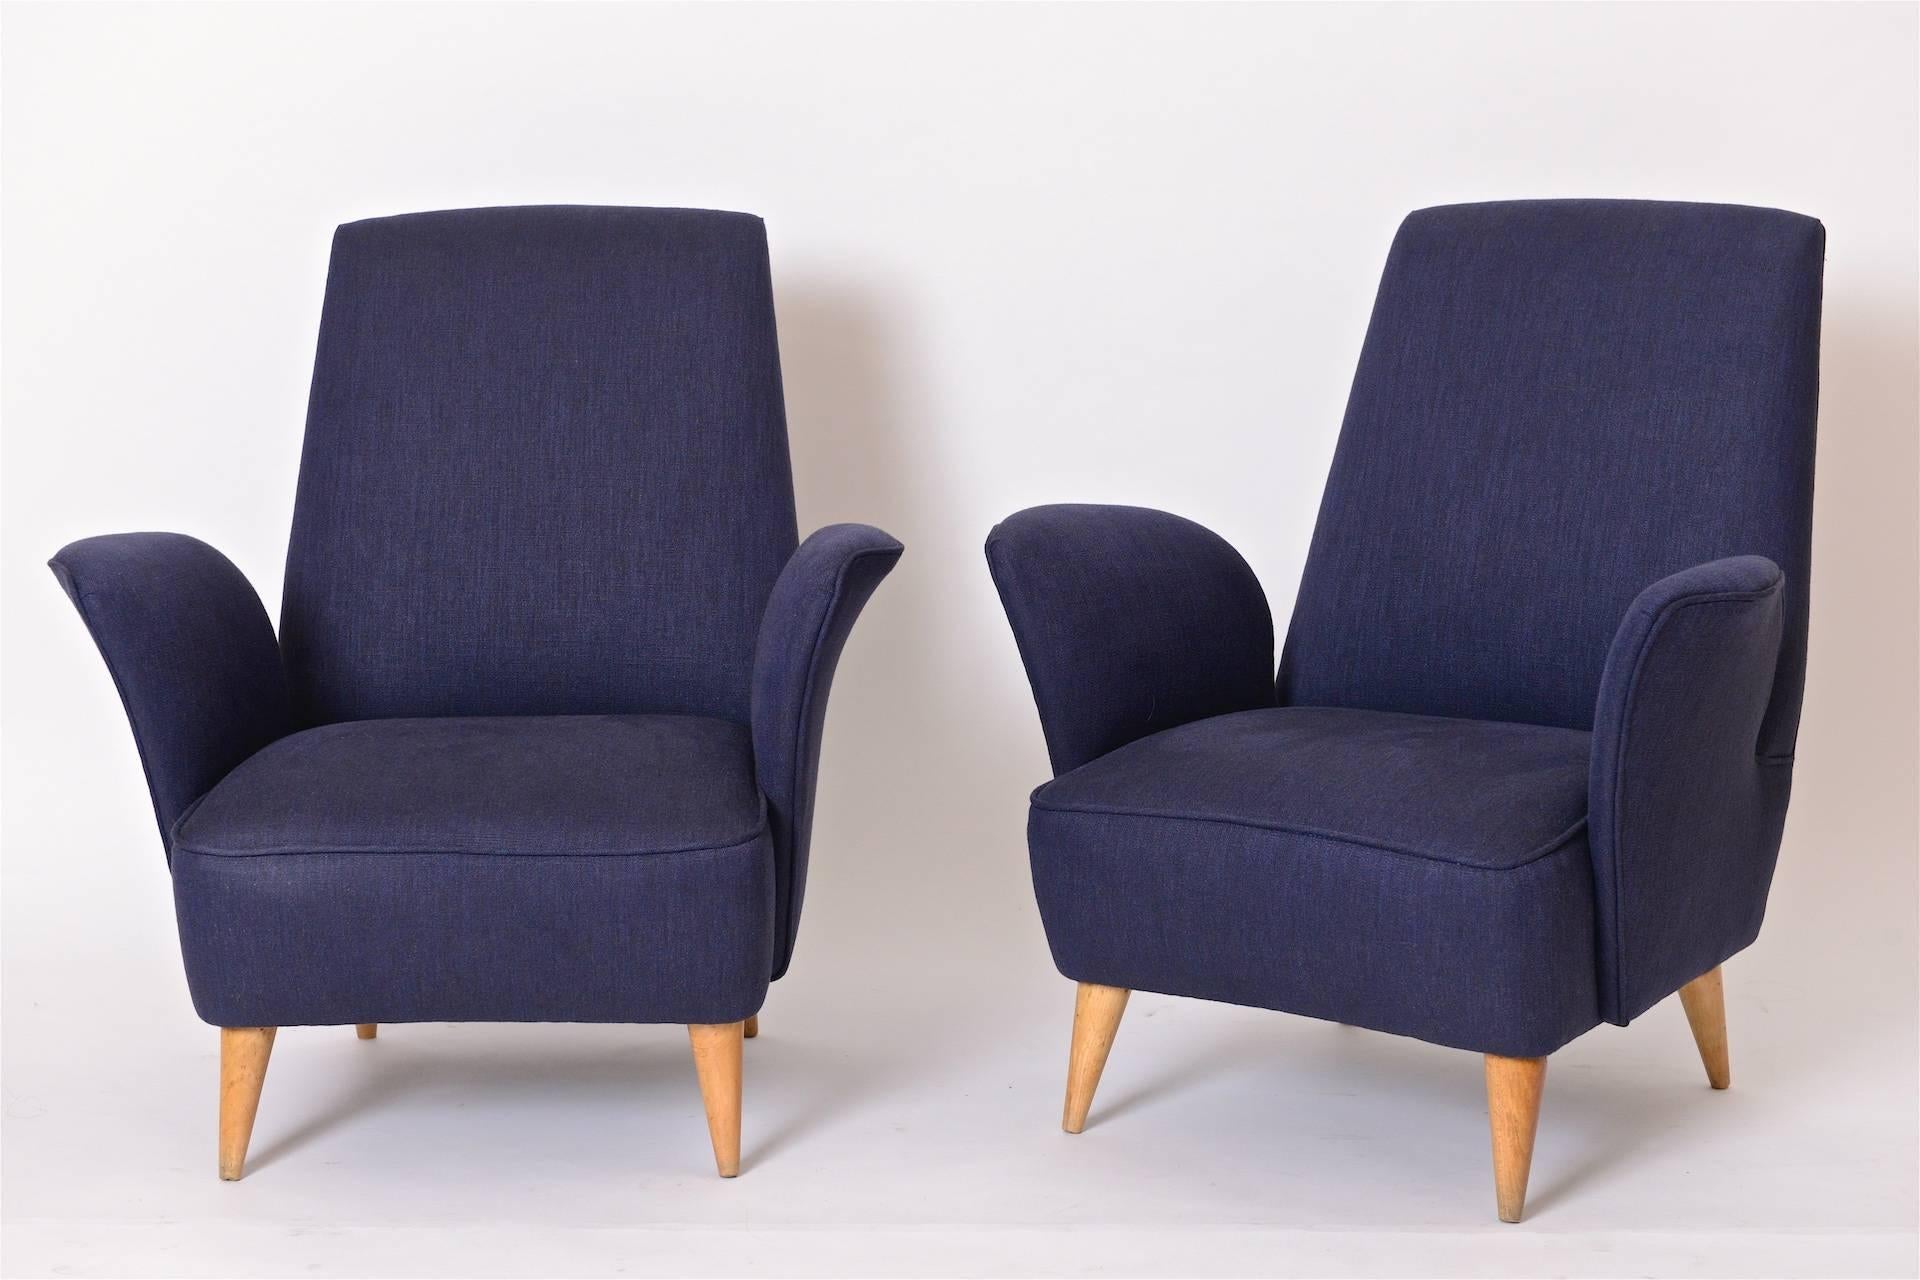 A wonderful pair of 1950s Italian lounge chairs in the manner of Nino Zoncada. These curvaceous Italian armchairs have been completely restored and re-upholstered in a luxurious navy blue linen fabric from Holly Hunt. Sitting on tapered maple legs,